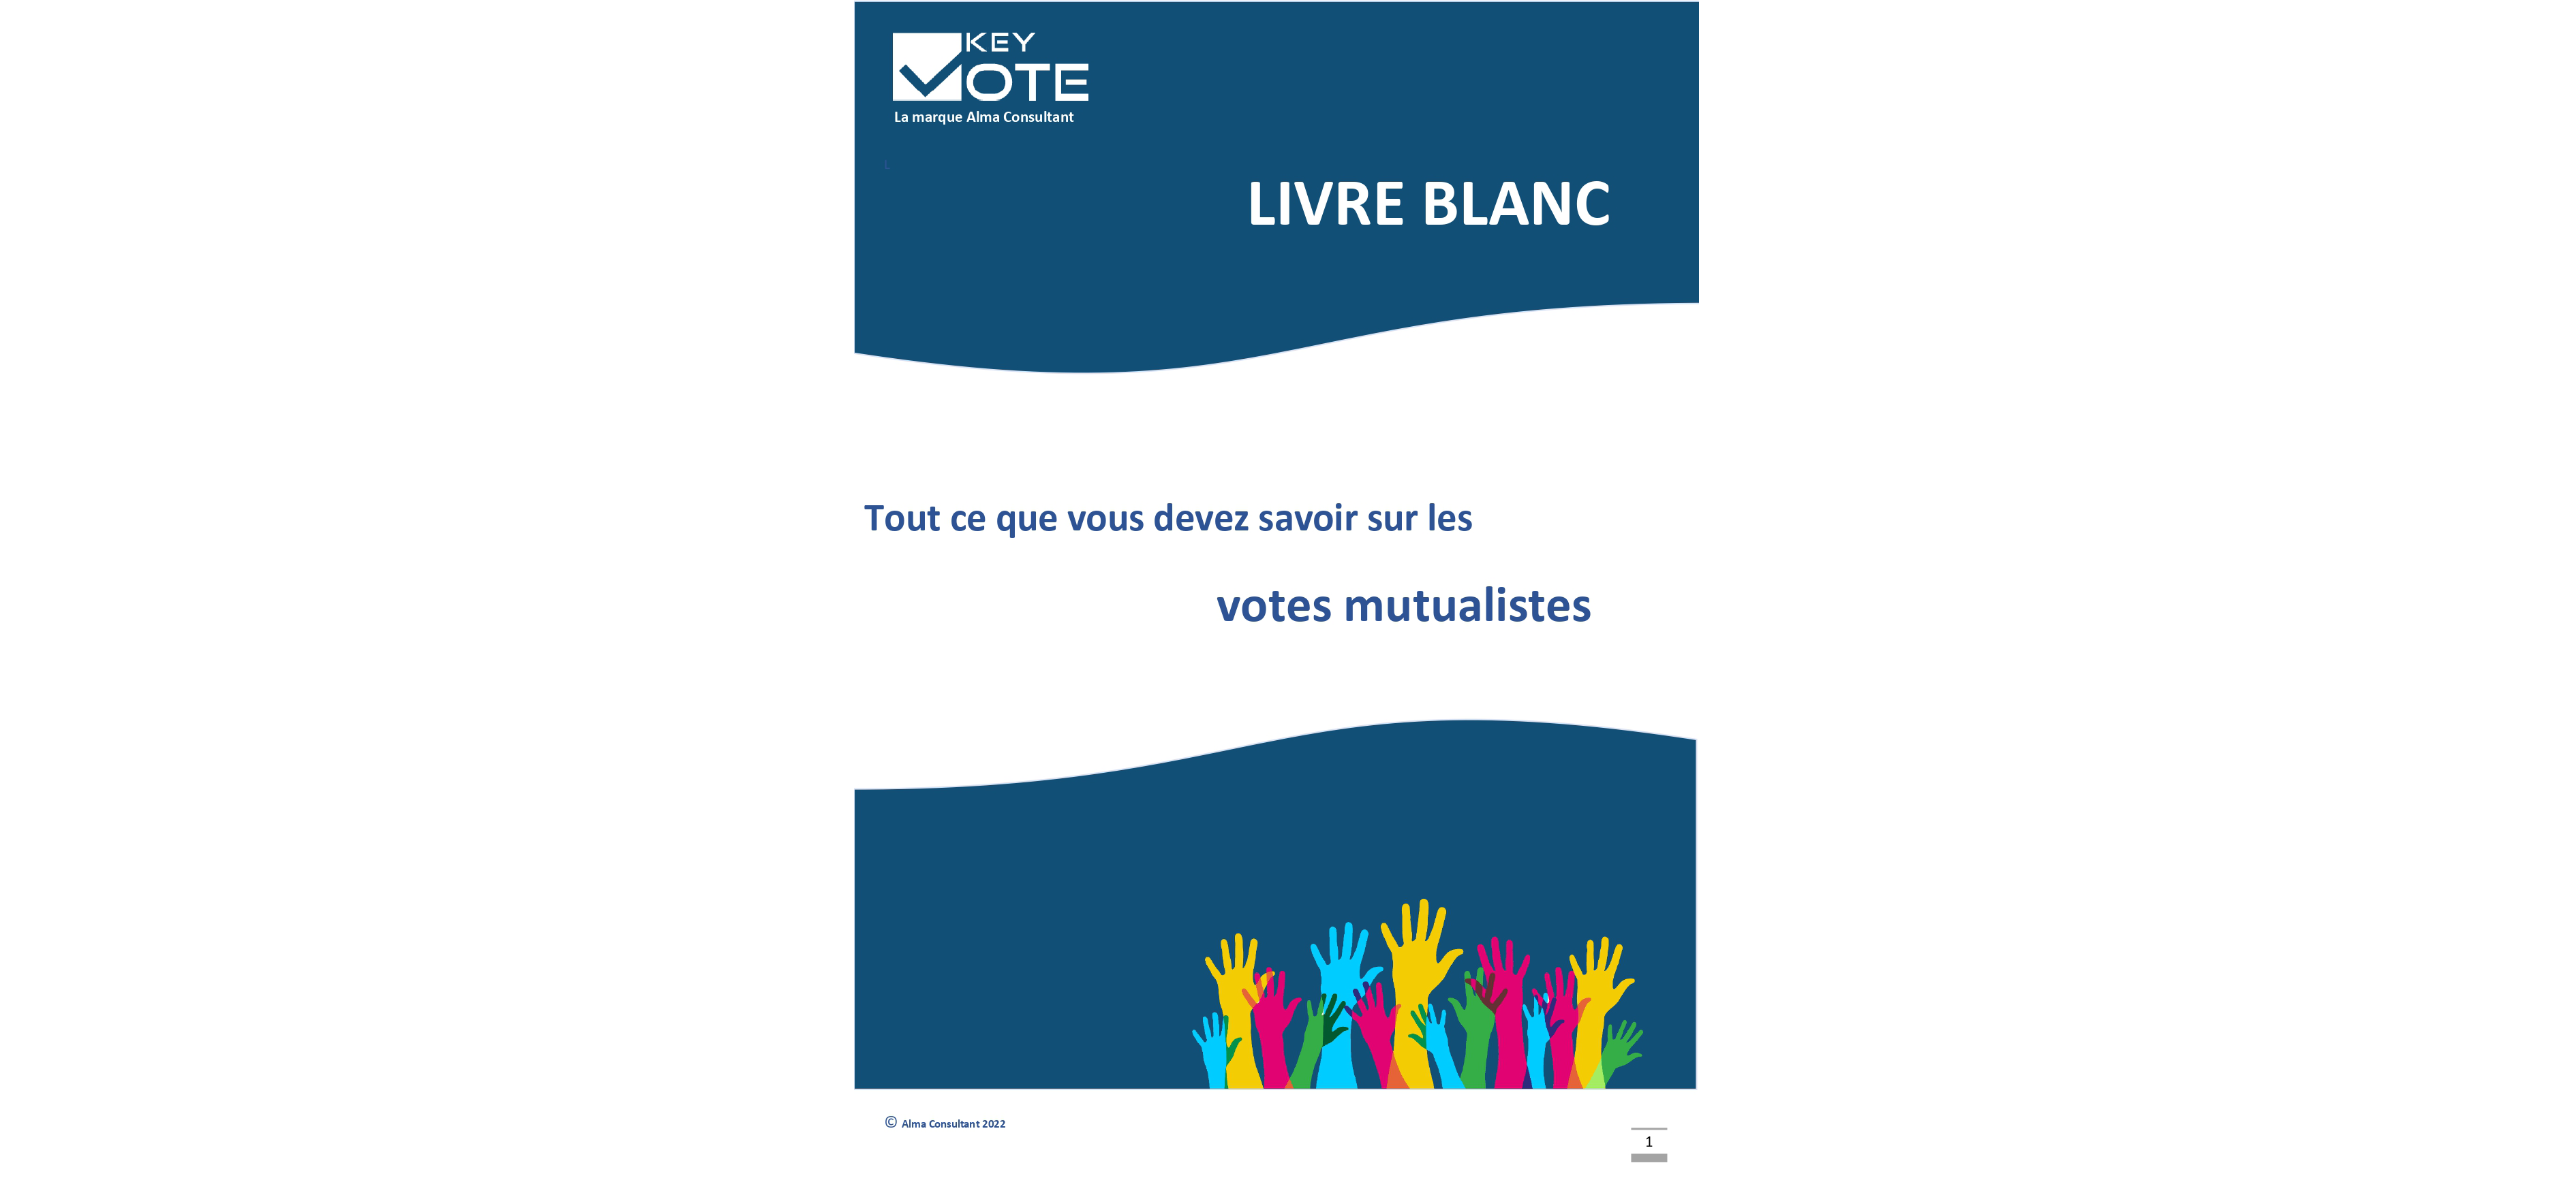 You are currently viewing Livre blanc votes mutualistes